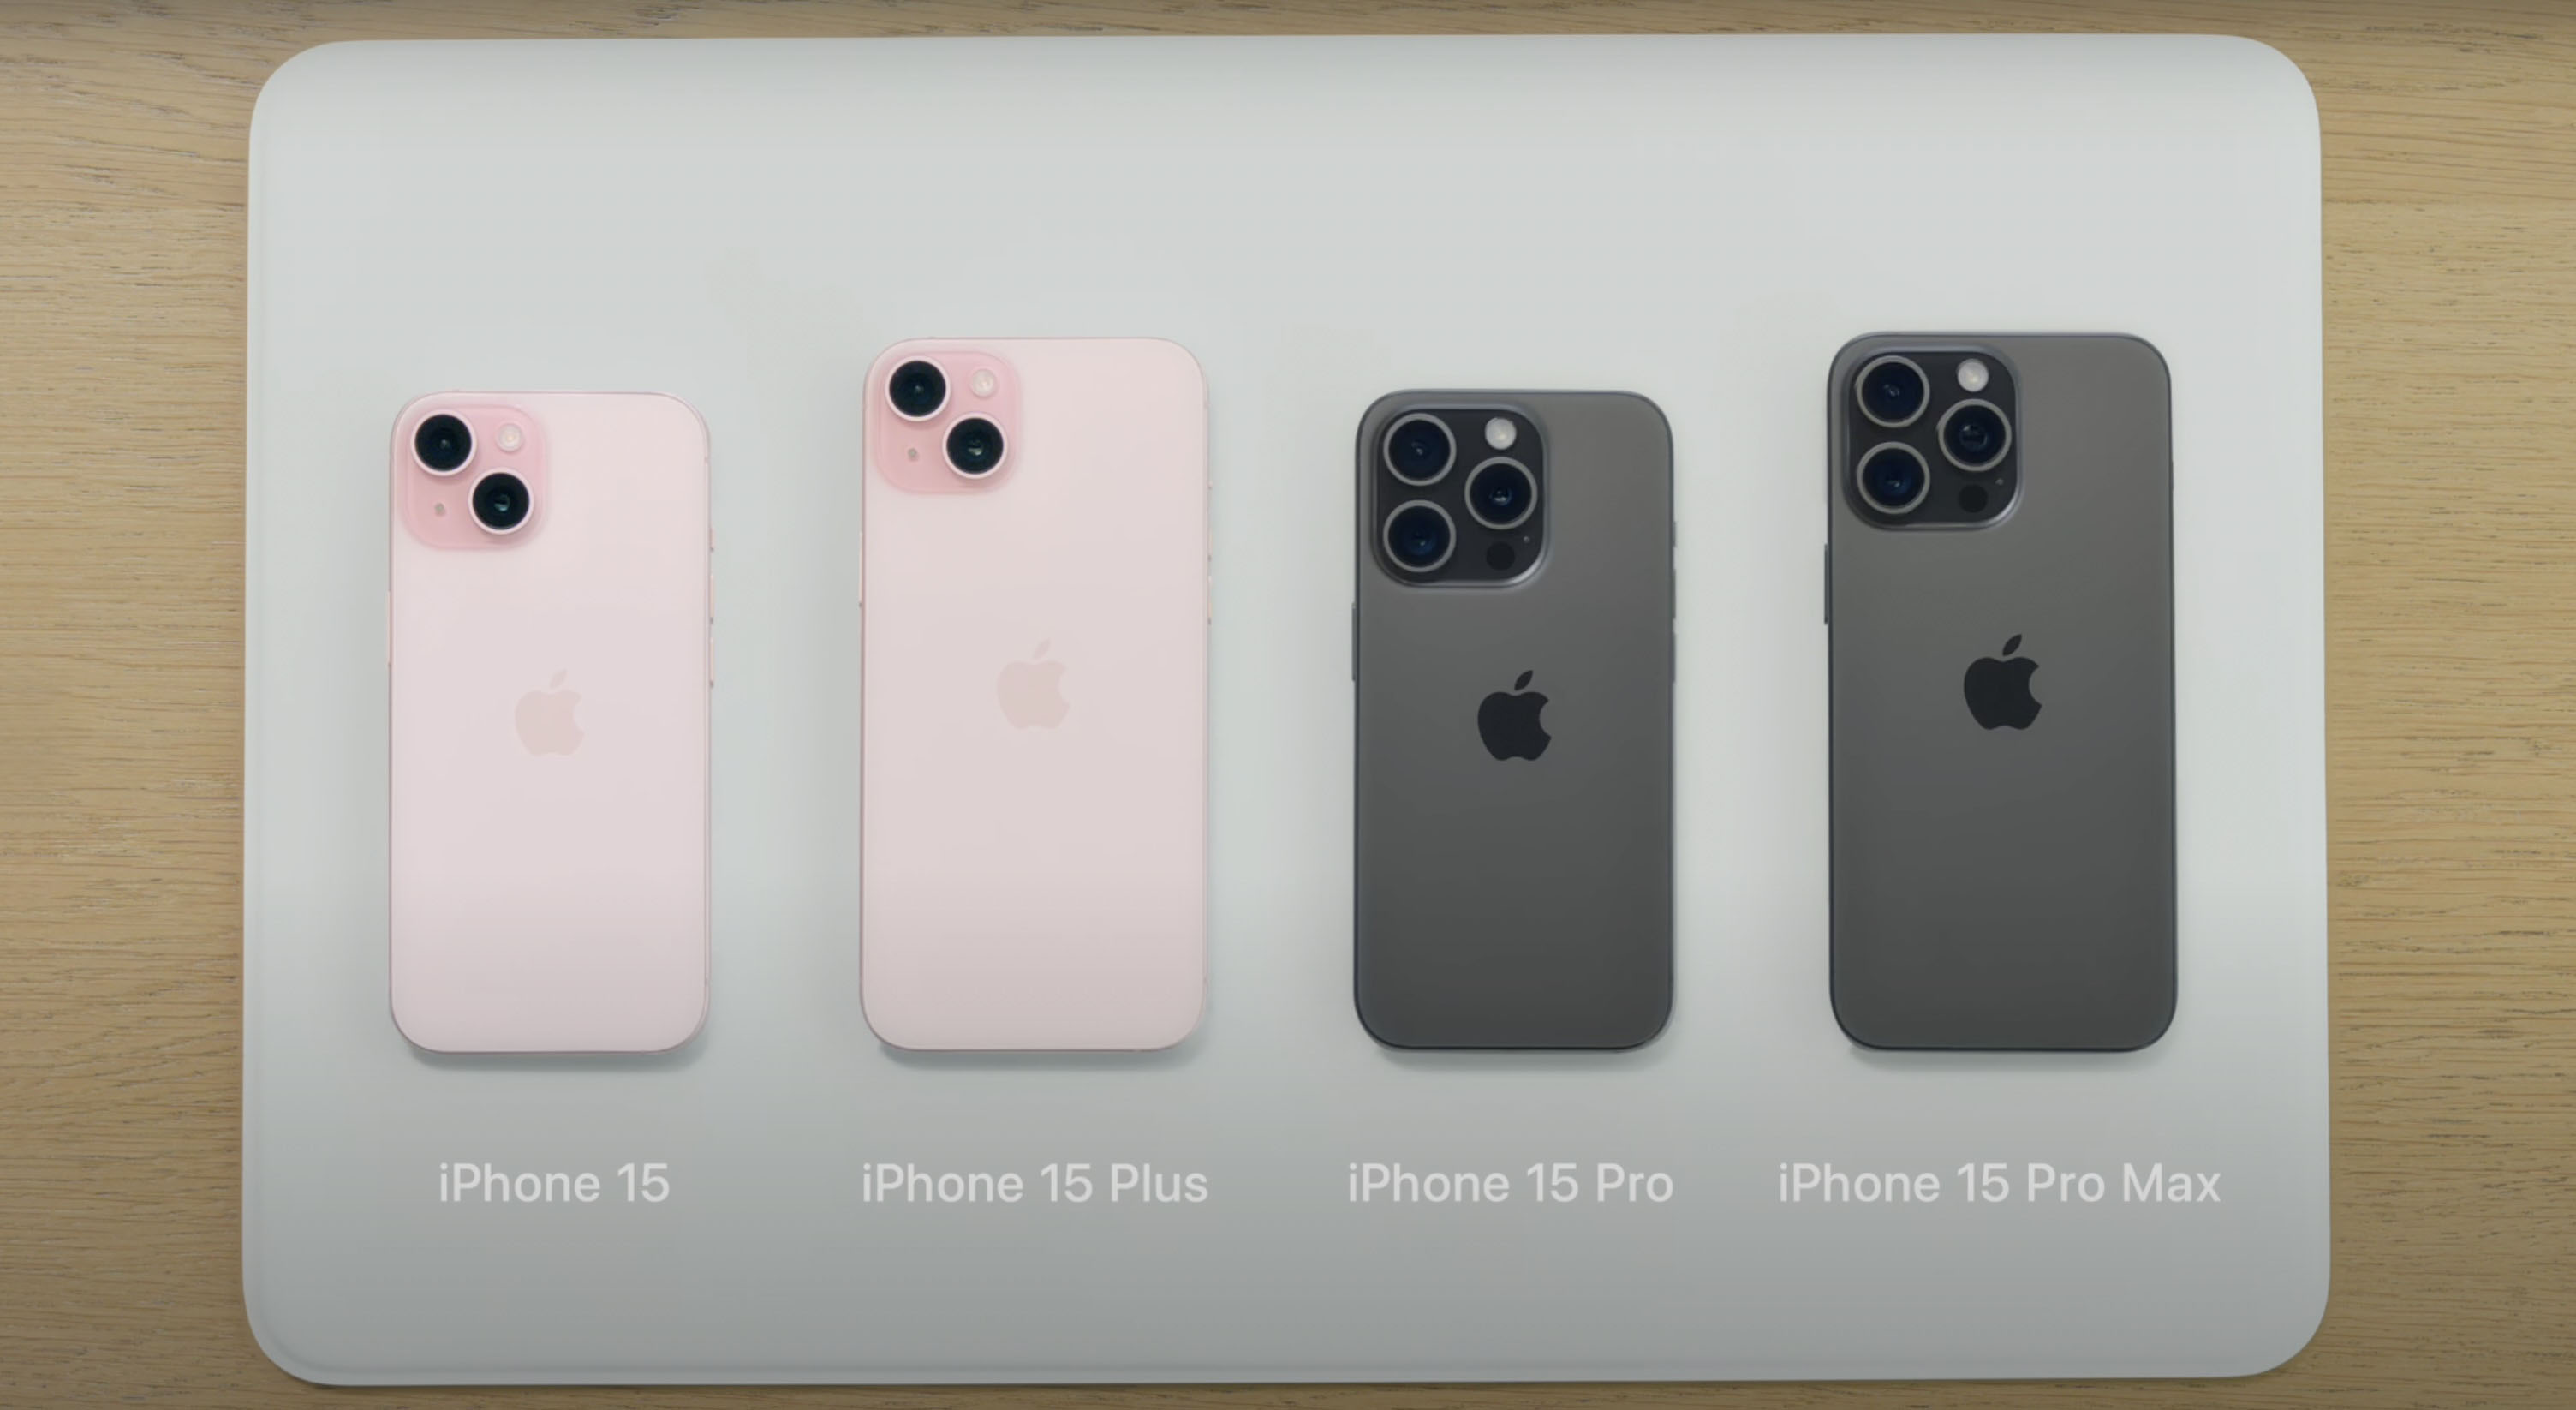 Apple iPhone 15 and iPhone 15 Pro pricing around the world